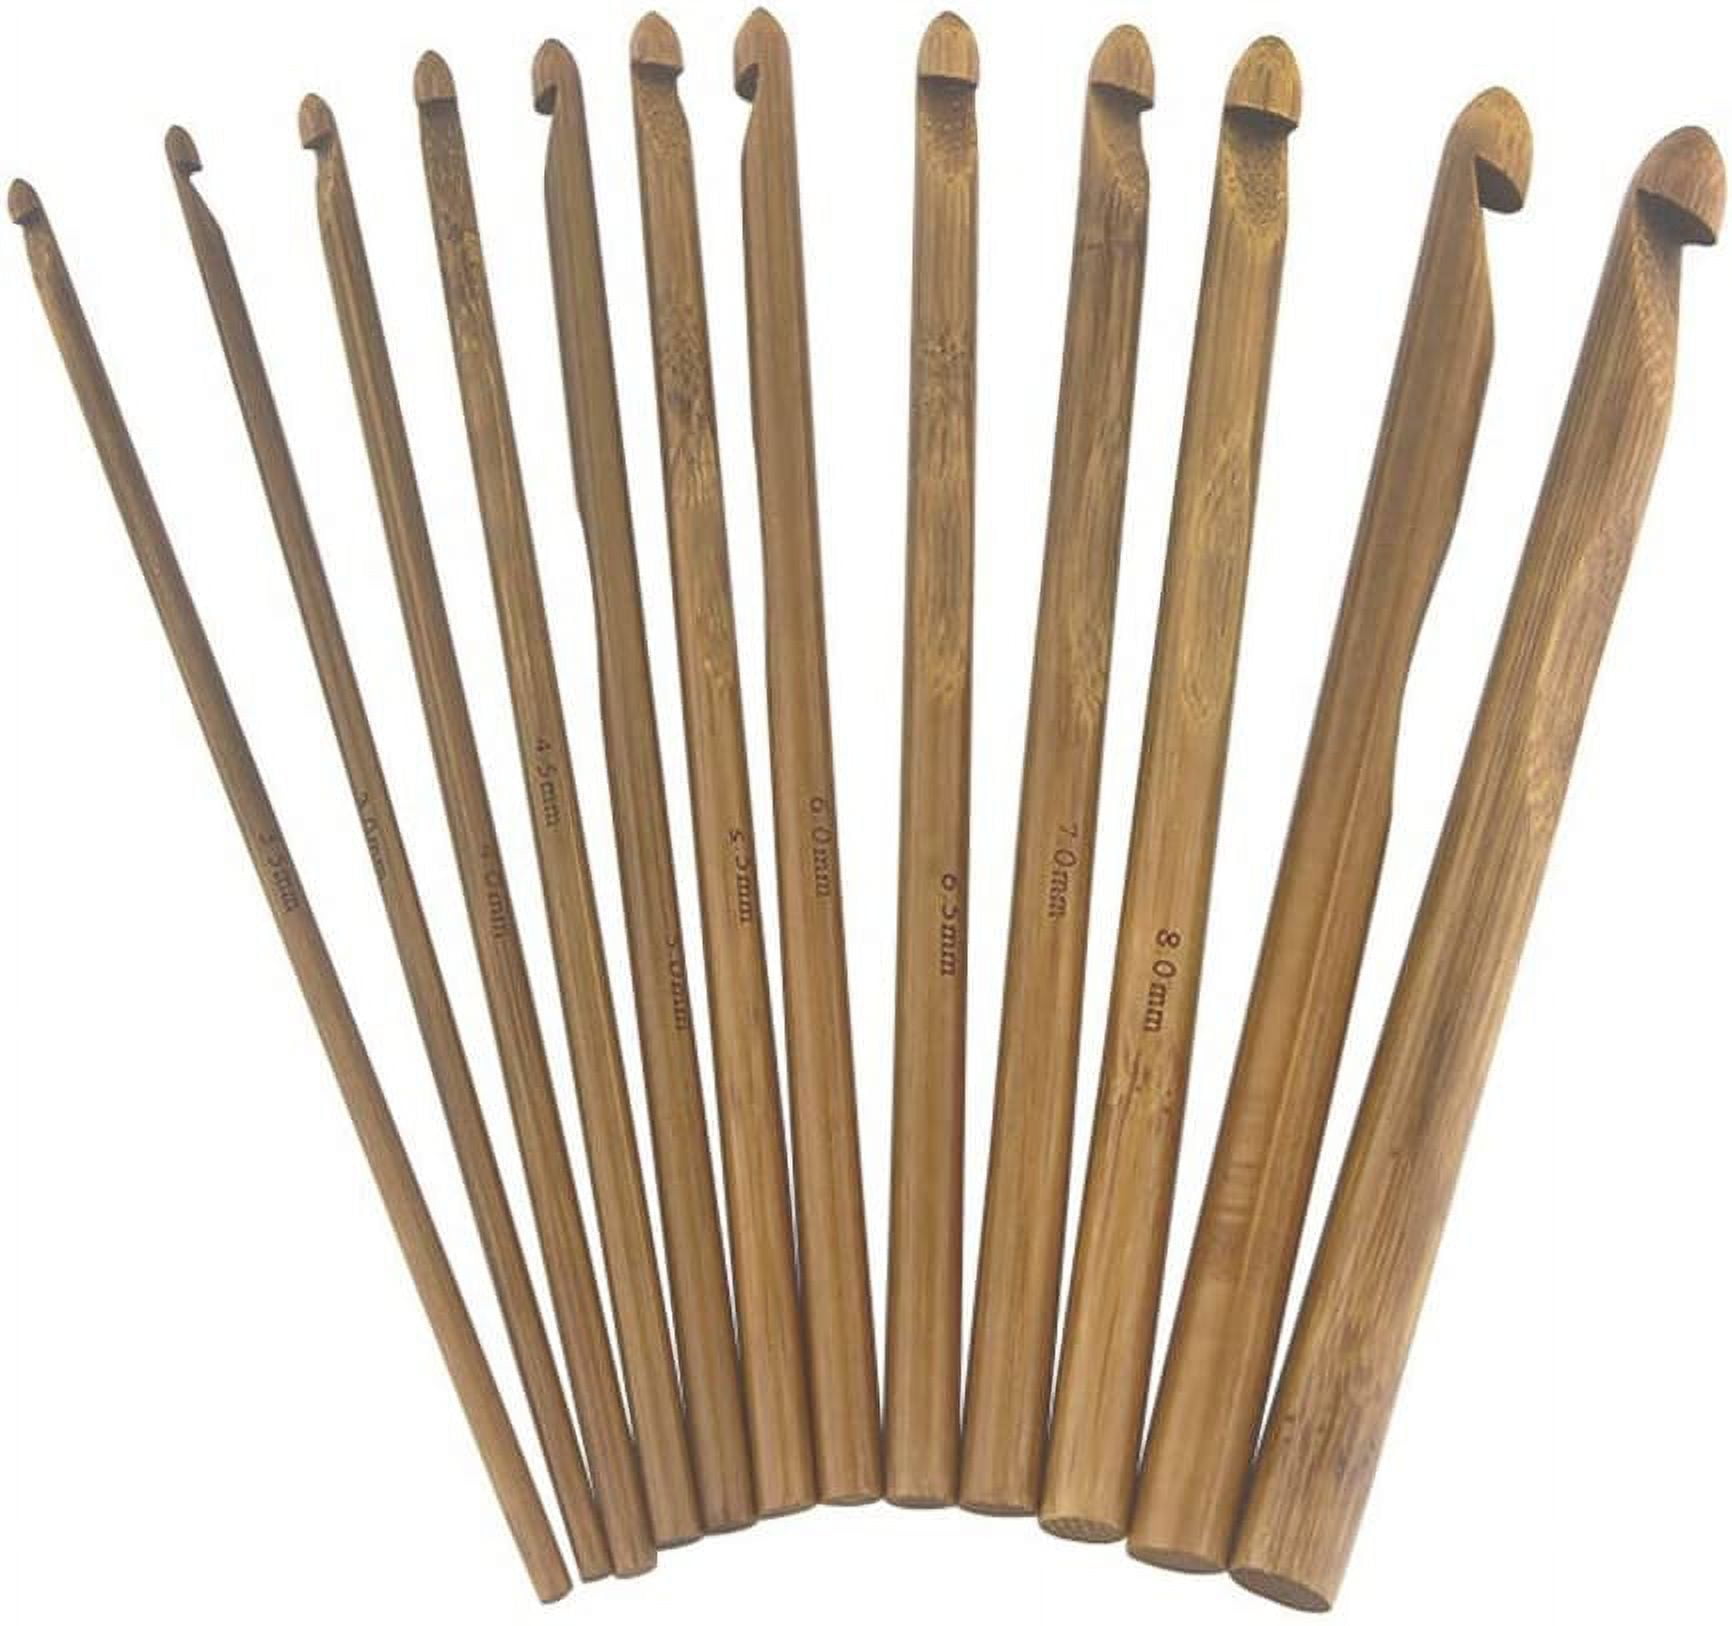 12 Pieces Bamboo Crochet Hooks Set, Large Crocheting Hook Knitting Needles  for Coarse Yarn (12 Sizes 3mm to 10mm in Diameter)